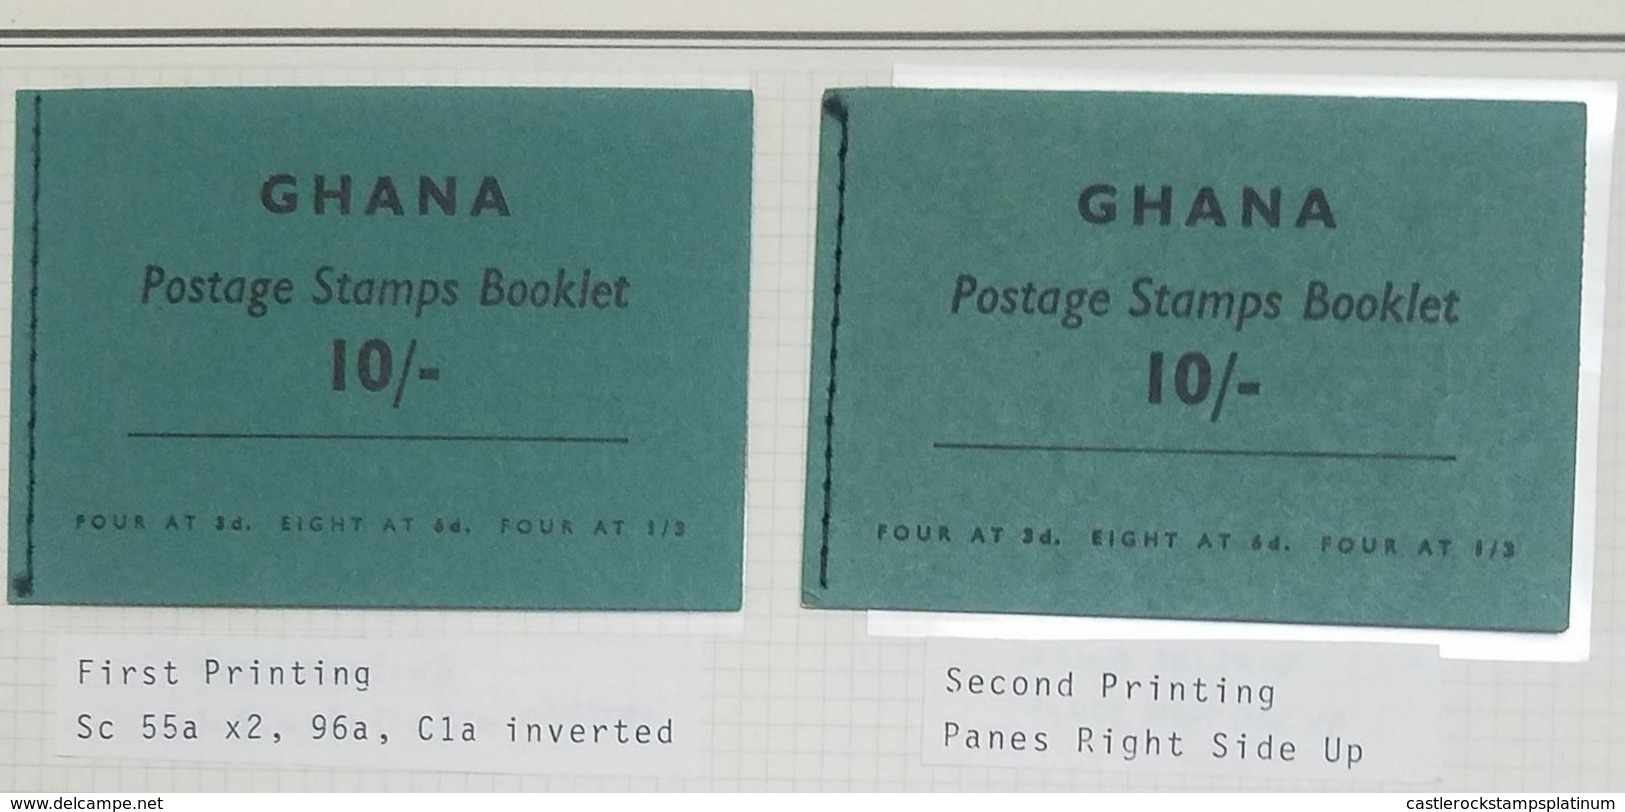 O)1961 GHANA, POSTAGE STAMPS BOOKLET - FIRST PRINTING SC 55a-96a -C1a INVERTED -SECOND PRINTING PANES RIGHT SIDE UP - Ghana (1957-...)